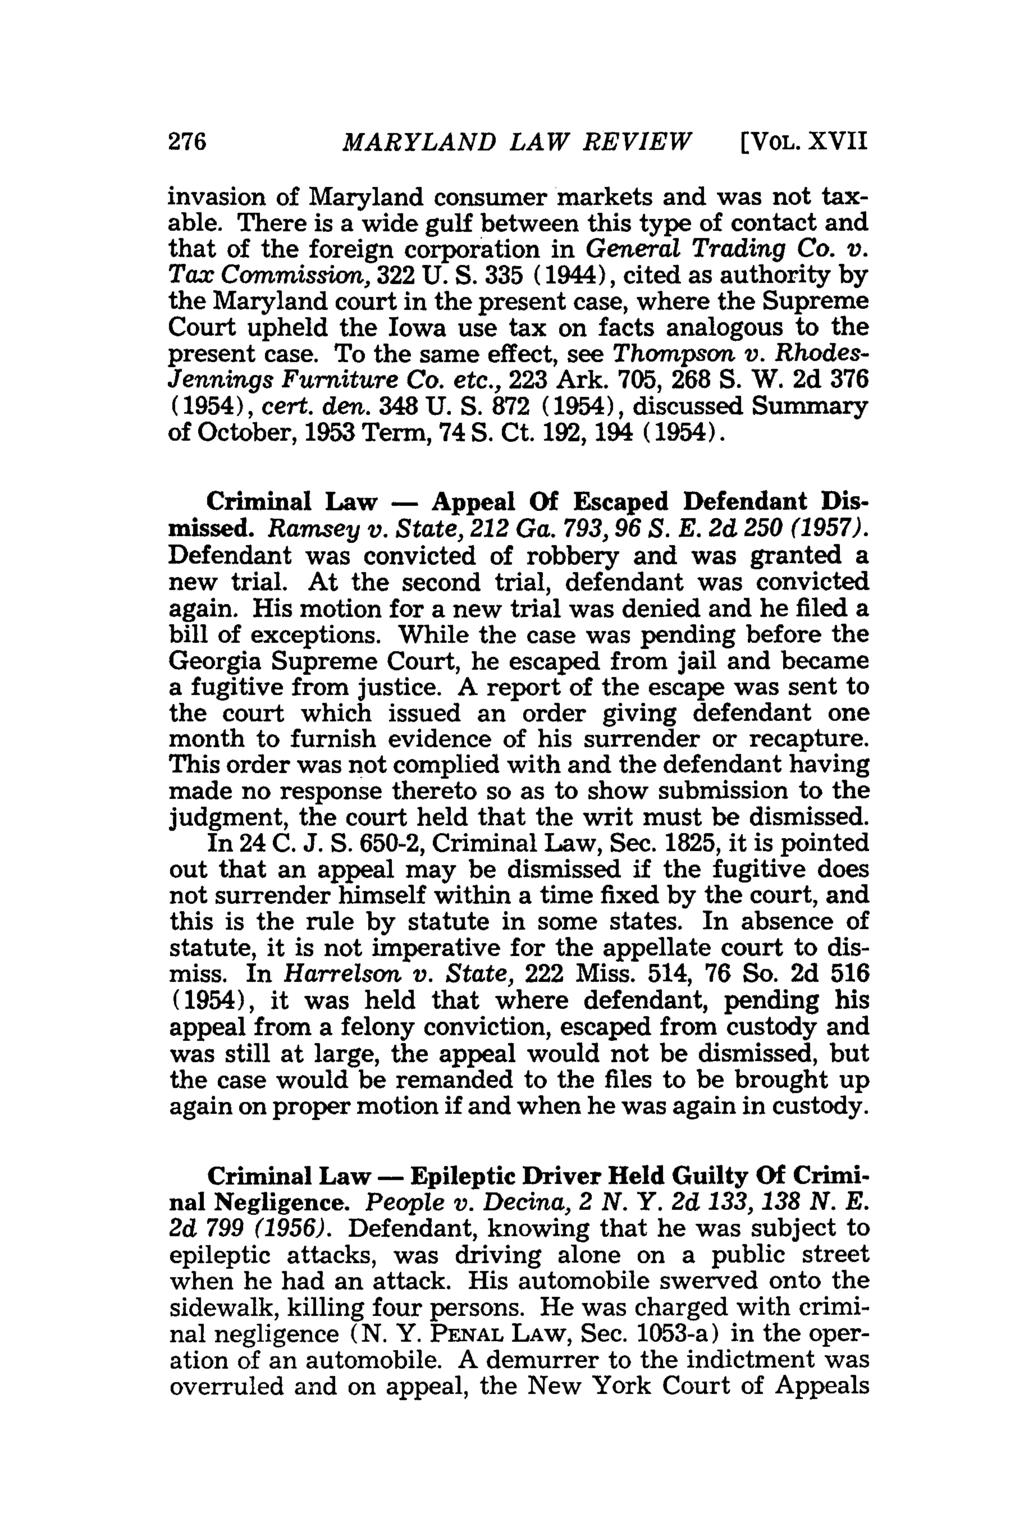 MARYLAND LAW REVIEW (VOL. XVII invasion of Maryland consumer markets and was not taxable. There is a wide gulf between this type of contact and that of the foreign corporation in General Trading Co.